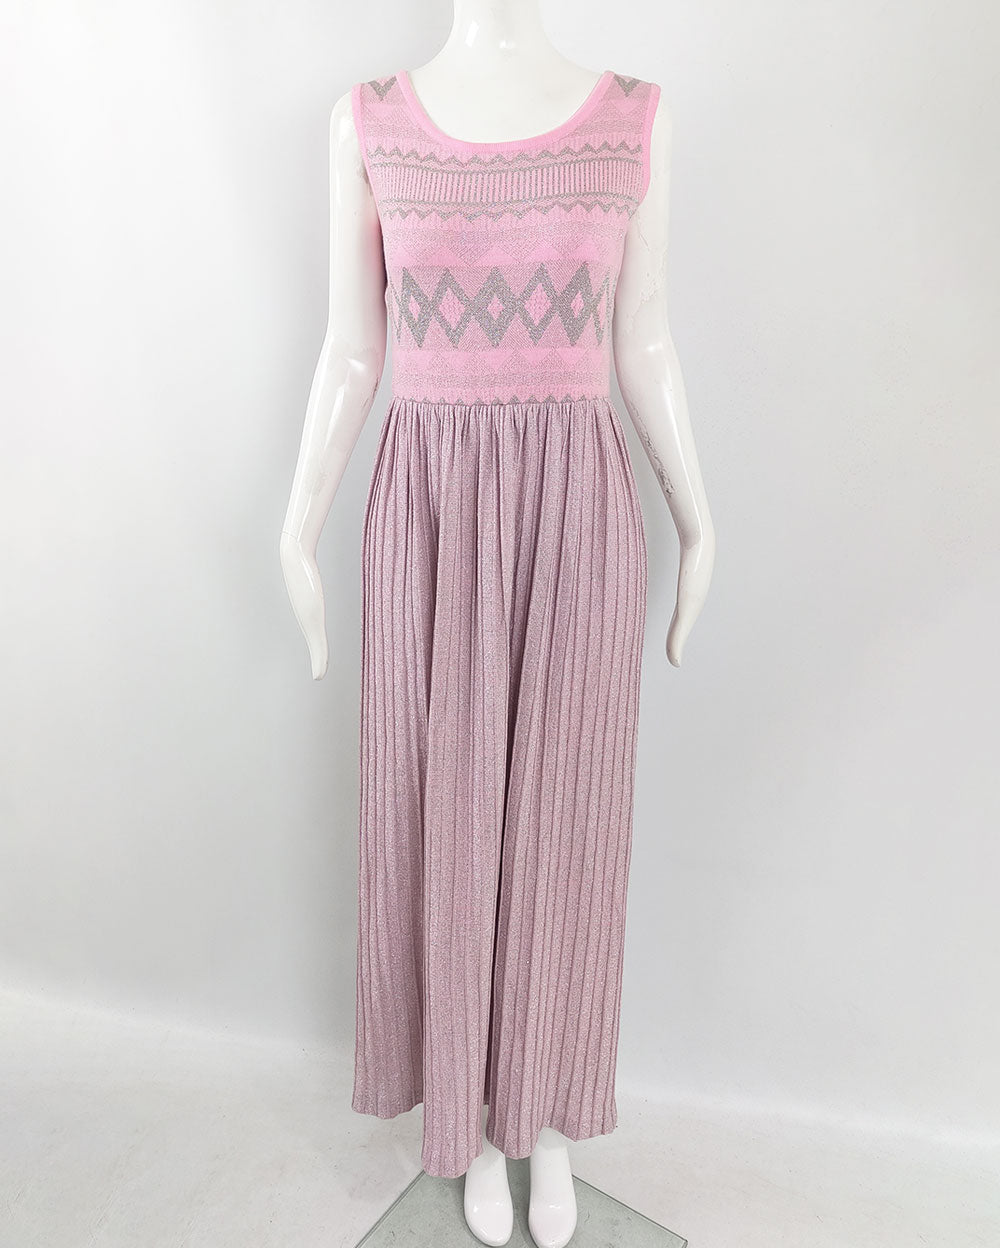 A vintage pink Louis Feraud maxi dress from the 1970s with a pleated skirt and geometric top.